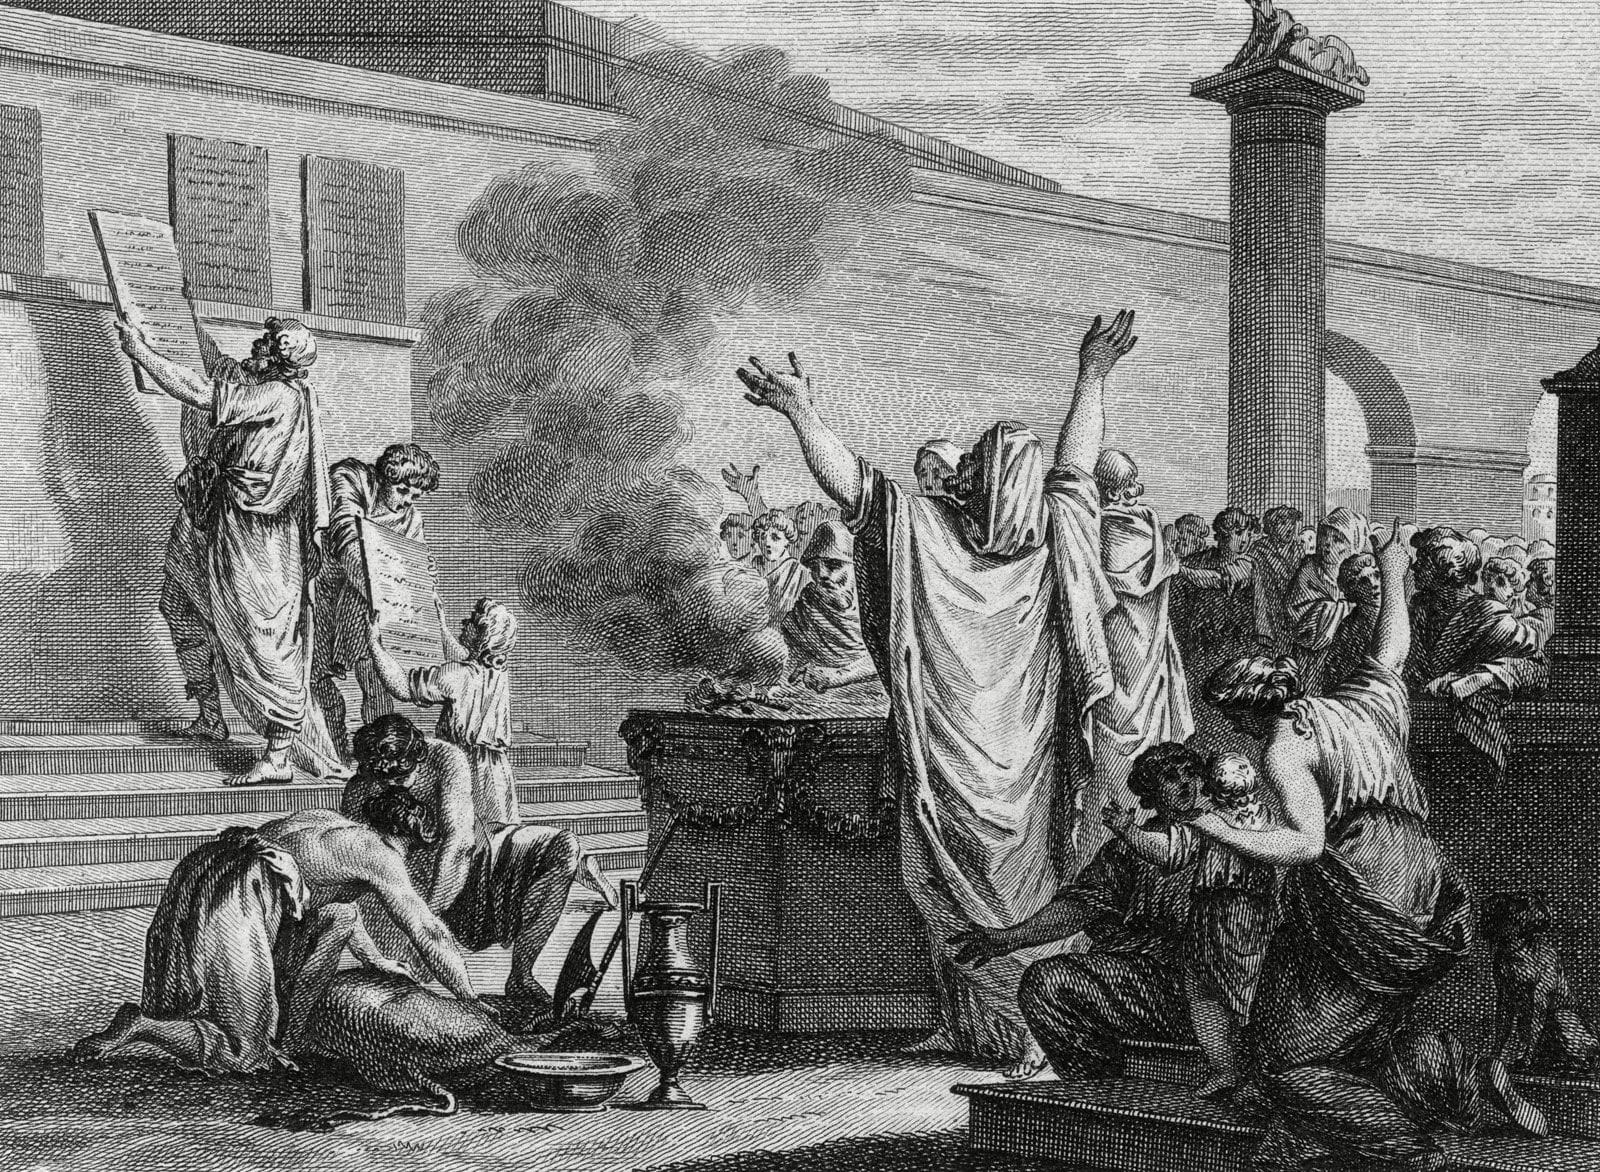 The unveiling of the Twelve Tables, a collection of Roman laws that were written at the insistence of the plebeians, 450 BCE